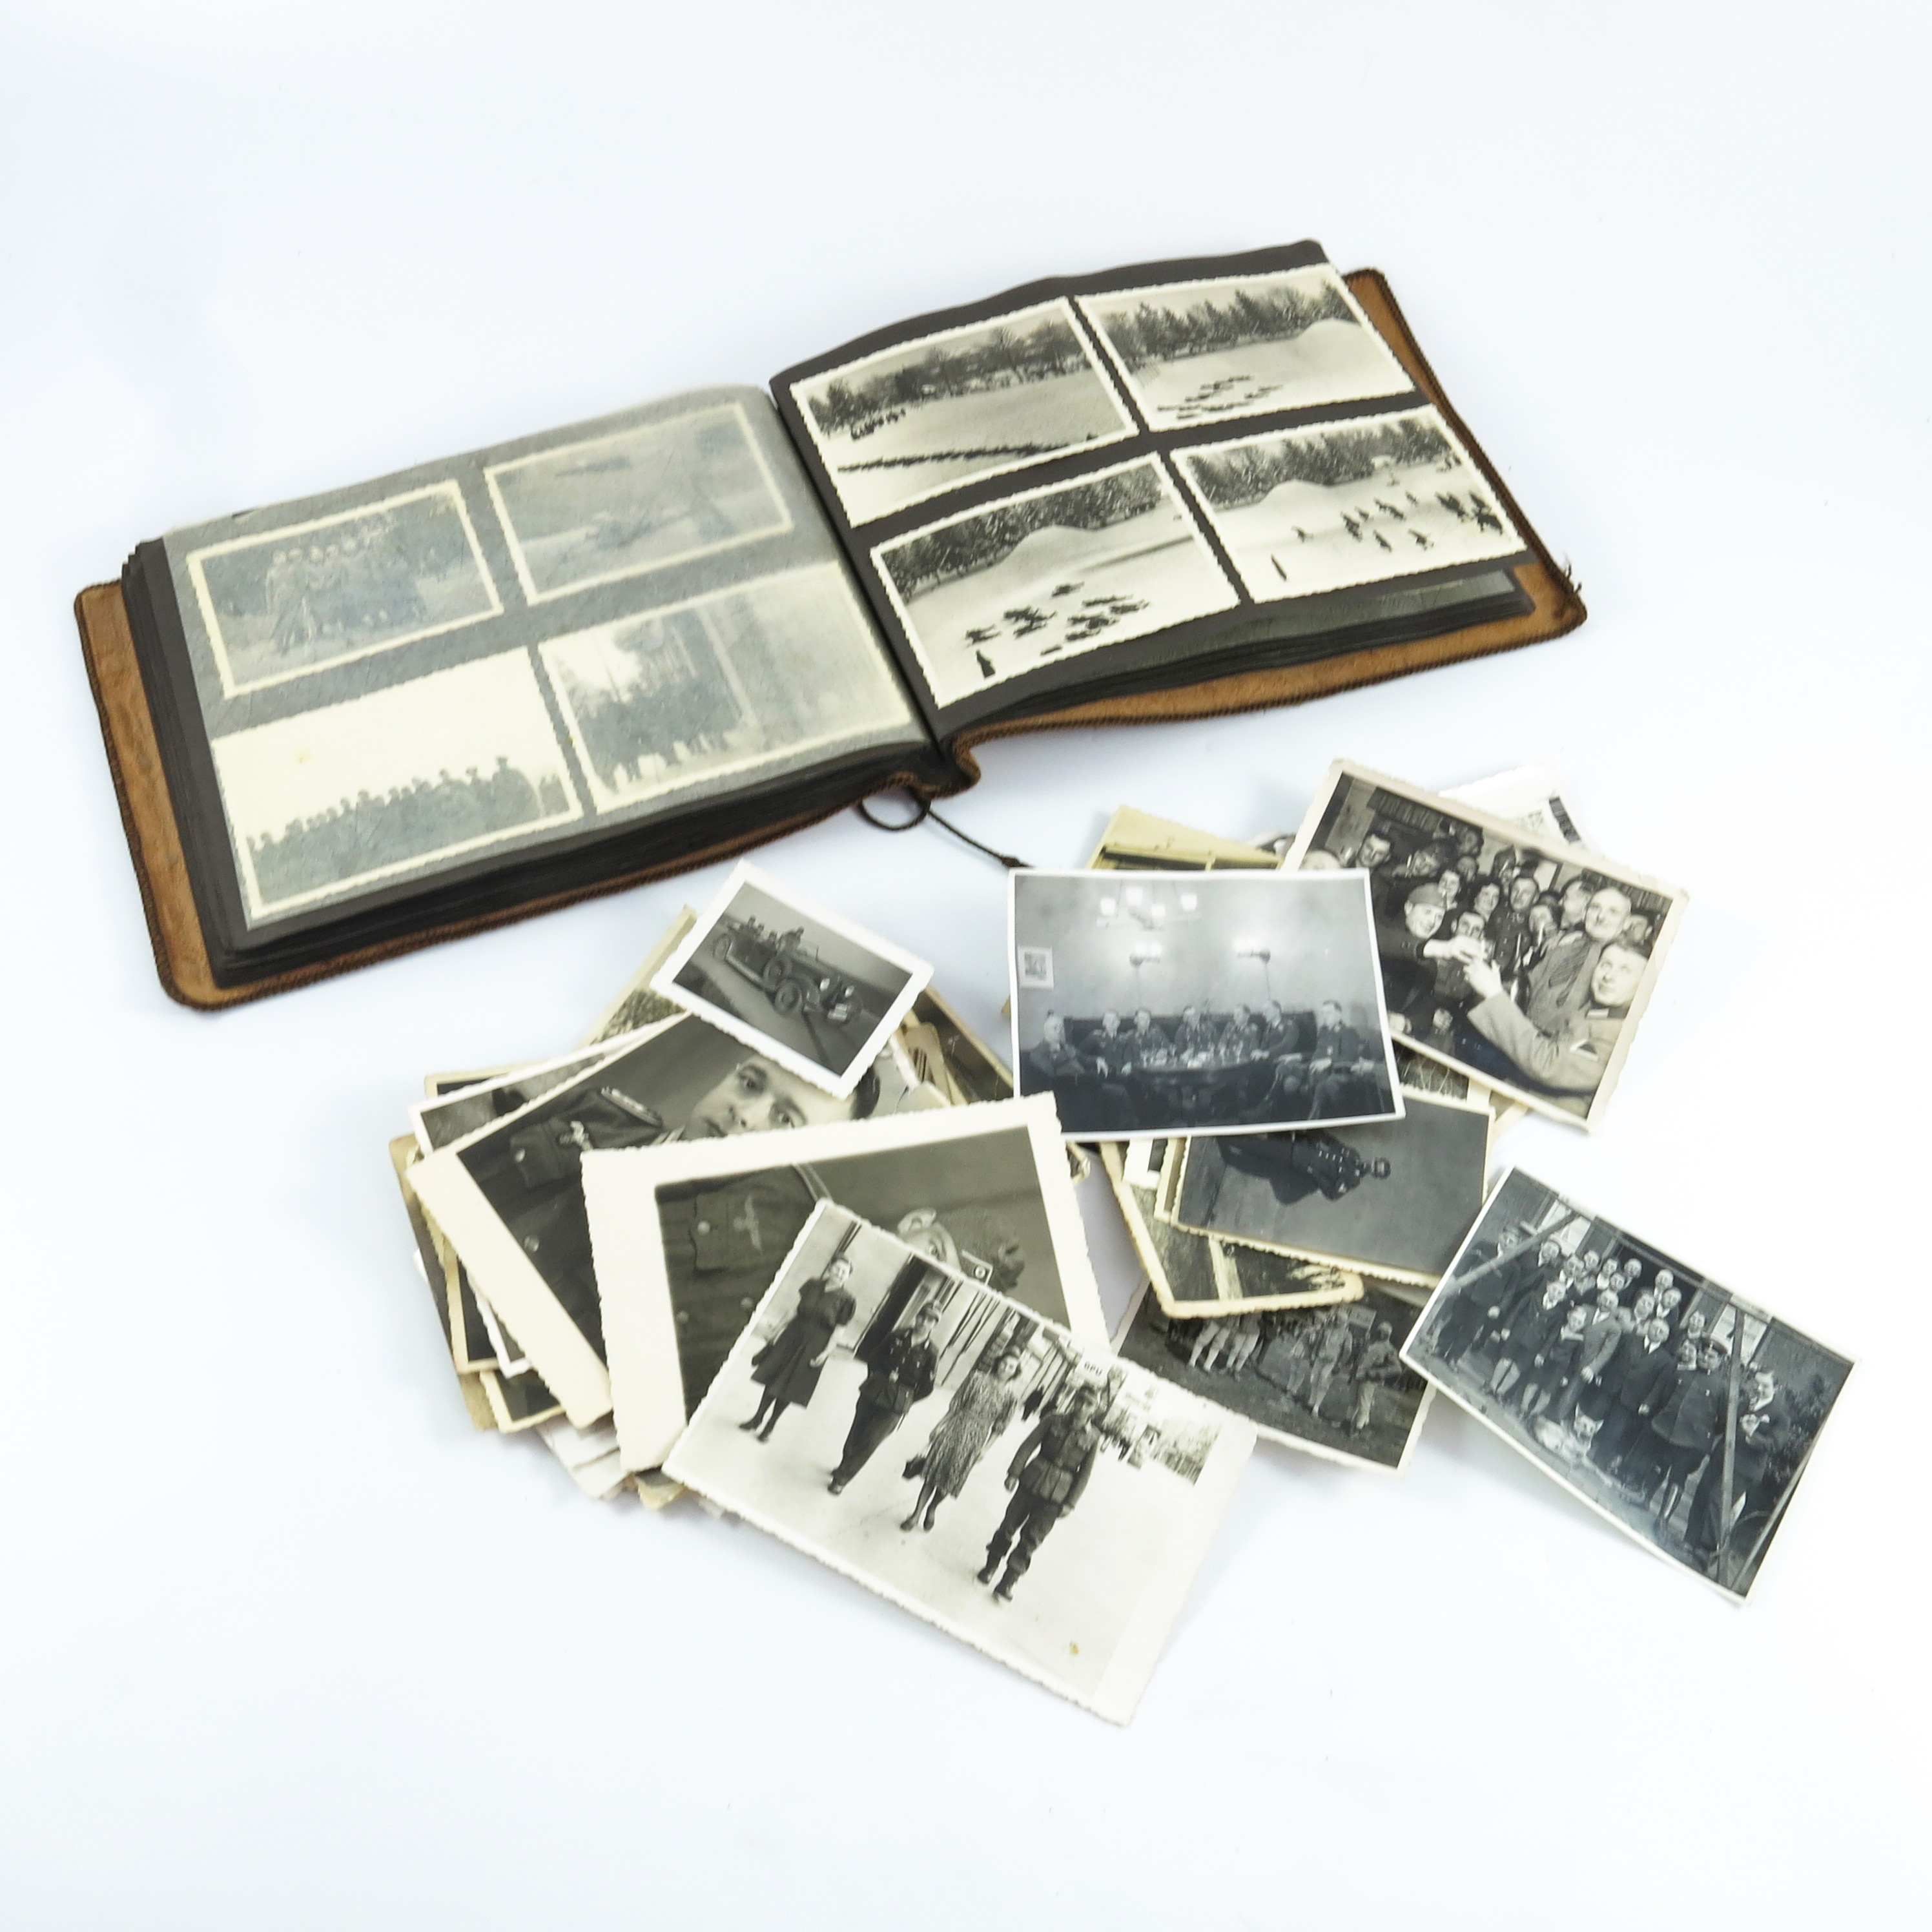 GERMAN WARTIME PHOTOGRAPH ALBUM AND QTY OF LOOSE WARTIME PHOTOGRAPHS - Image 2 of 3